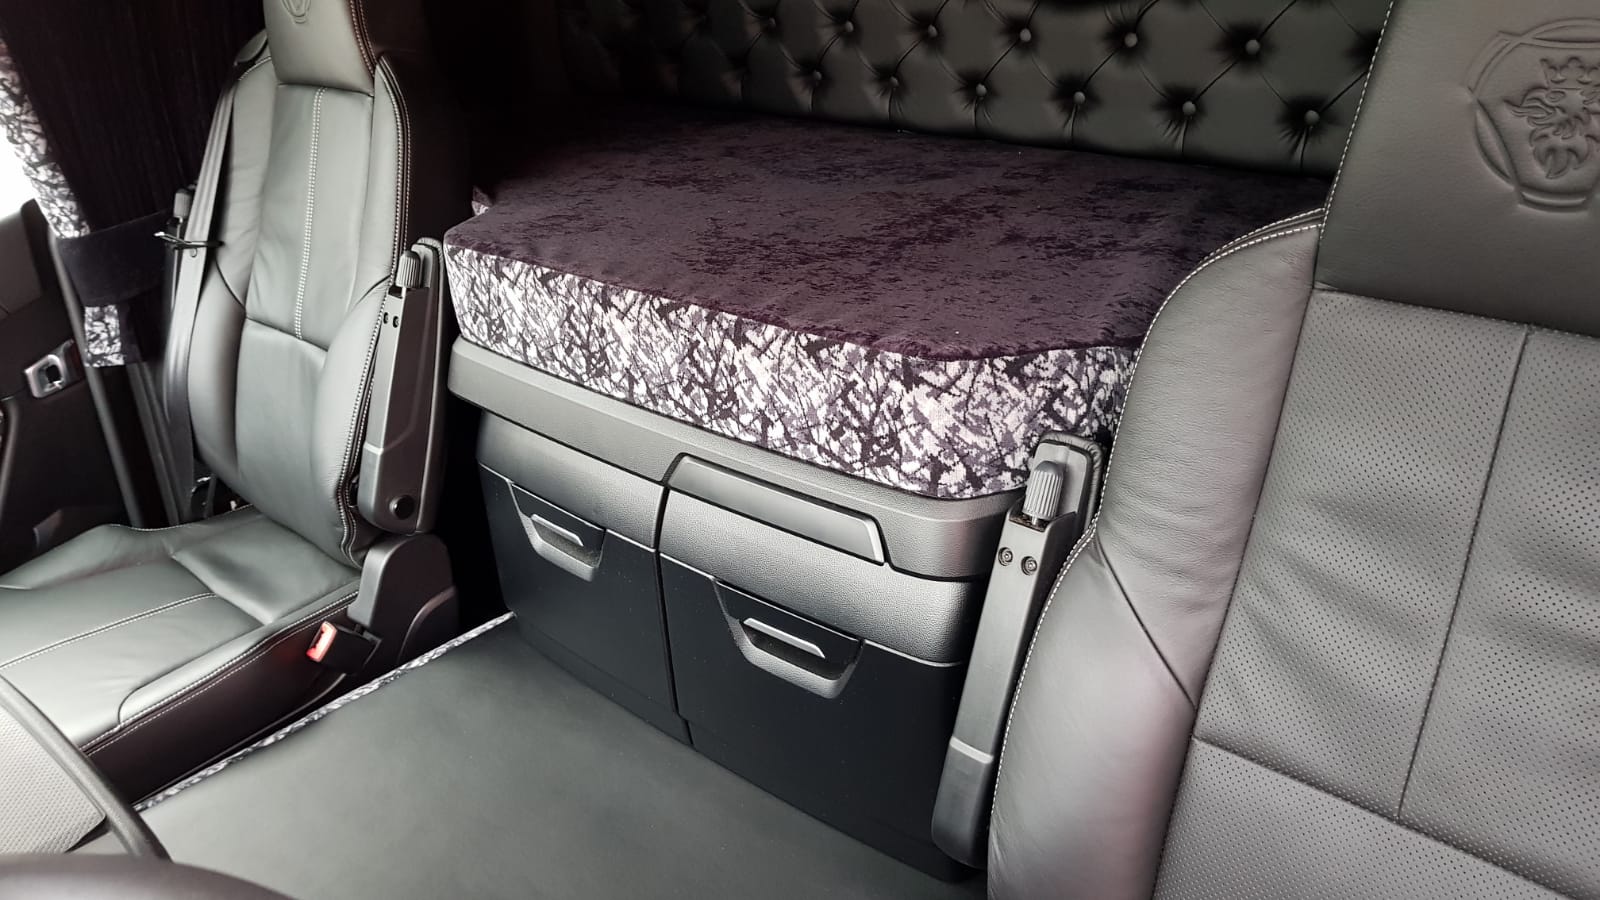 Louis Vuitton Seat Covers - Home Decorating Ideas  Leather car seat  covers, Seat covers, Cool car accessories